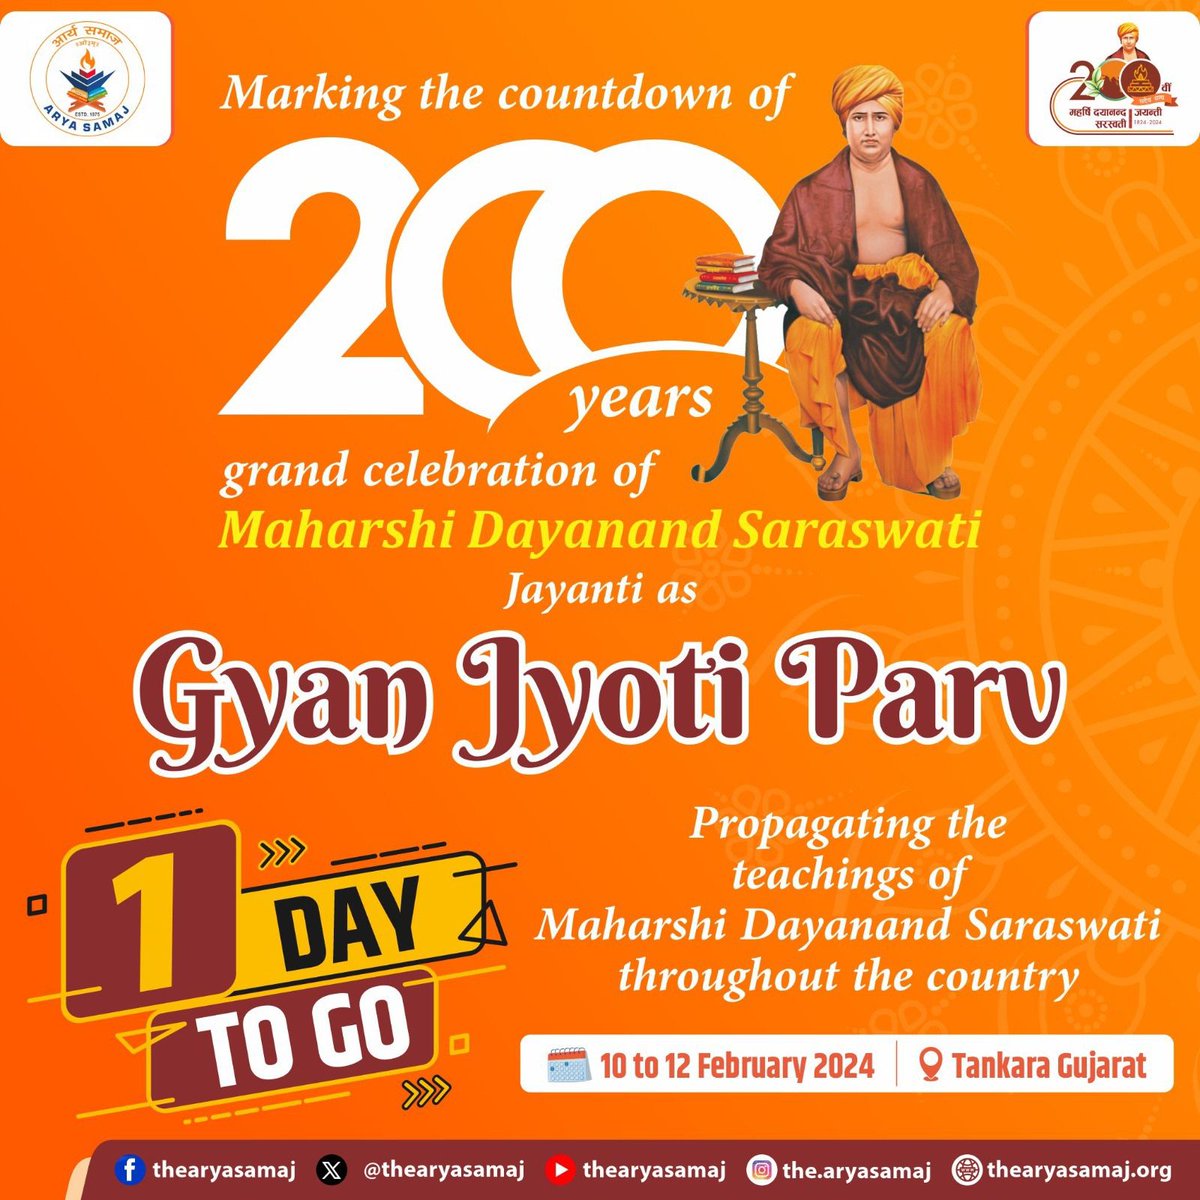 Only one day left until #GyanJyotiParv2024 in Tankara!

We're on the verge of commemorating the bicentenary of Maharshi Dayanand Saraswati. Join us with excitement for Gyan Jyoti Parv 2024, a tribute to the enduring wisdom that has guided our nation's ethos for two centuries.

🗓️…